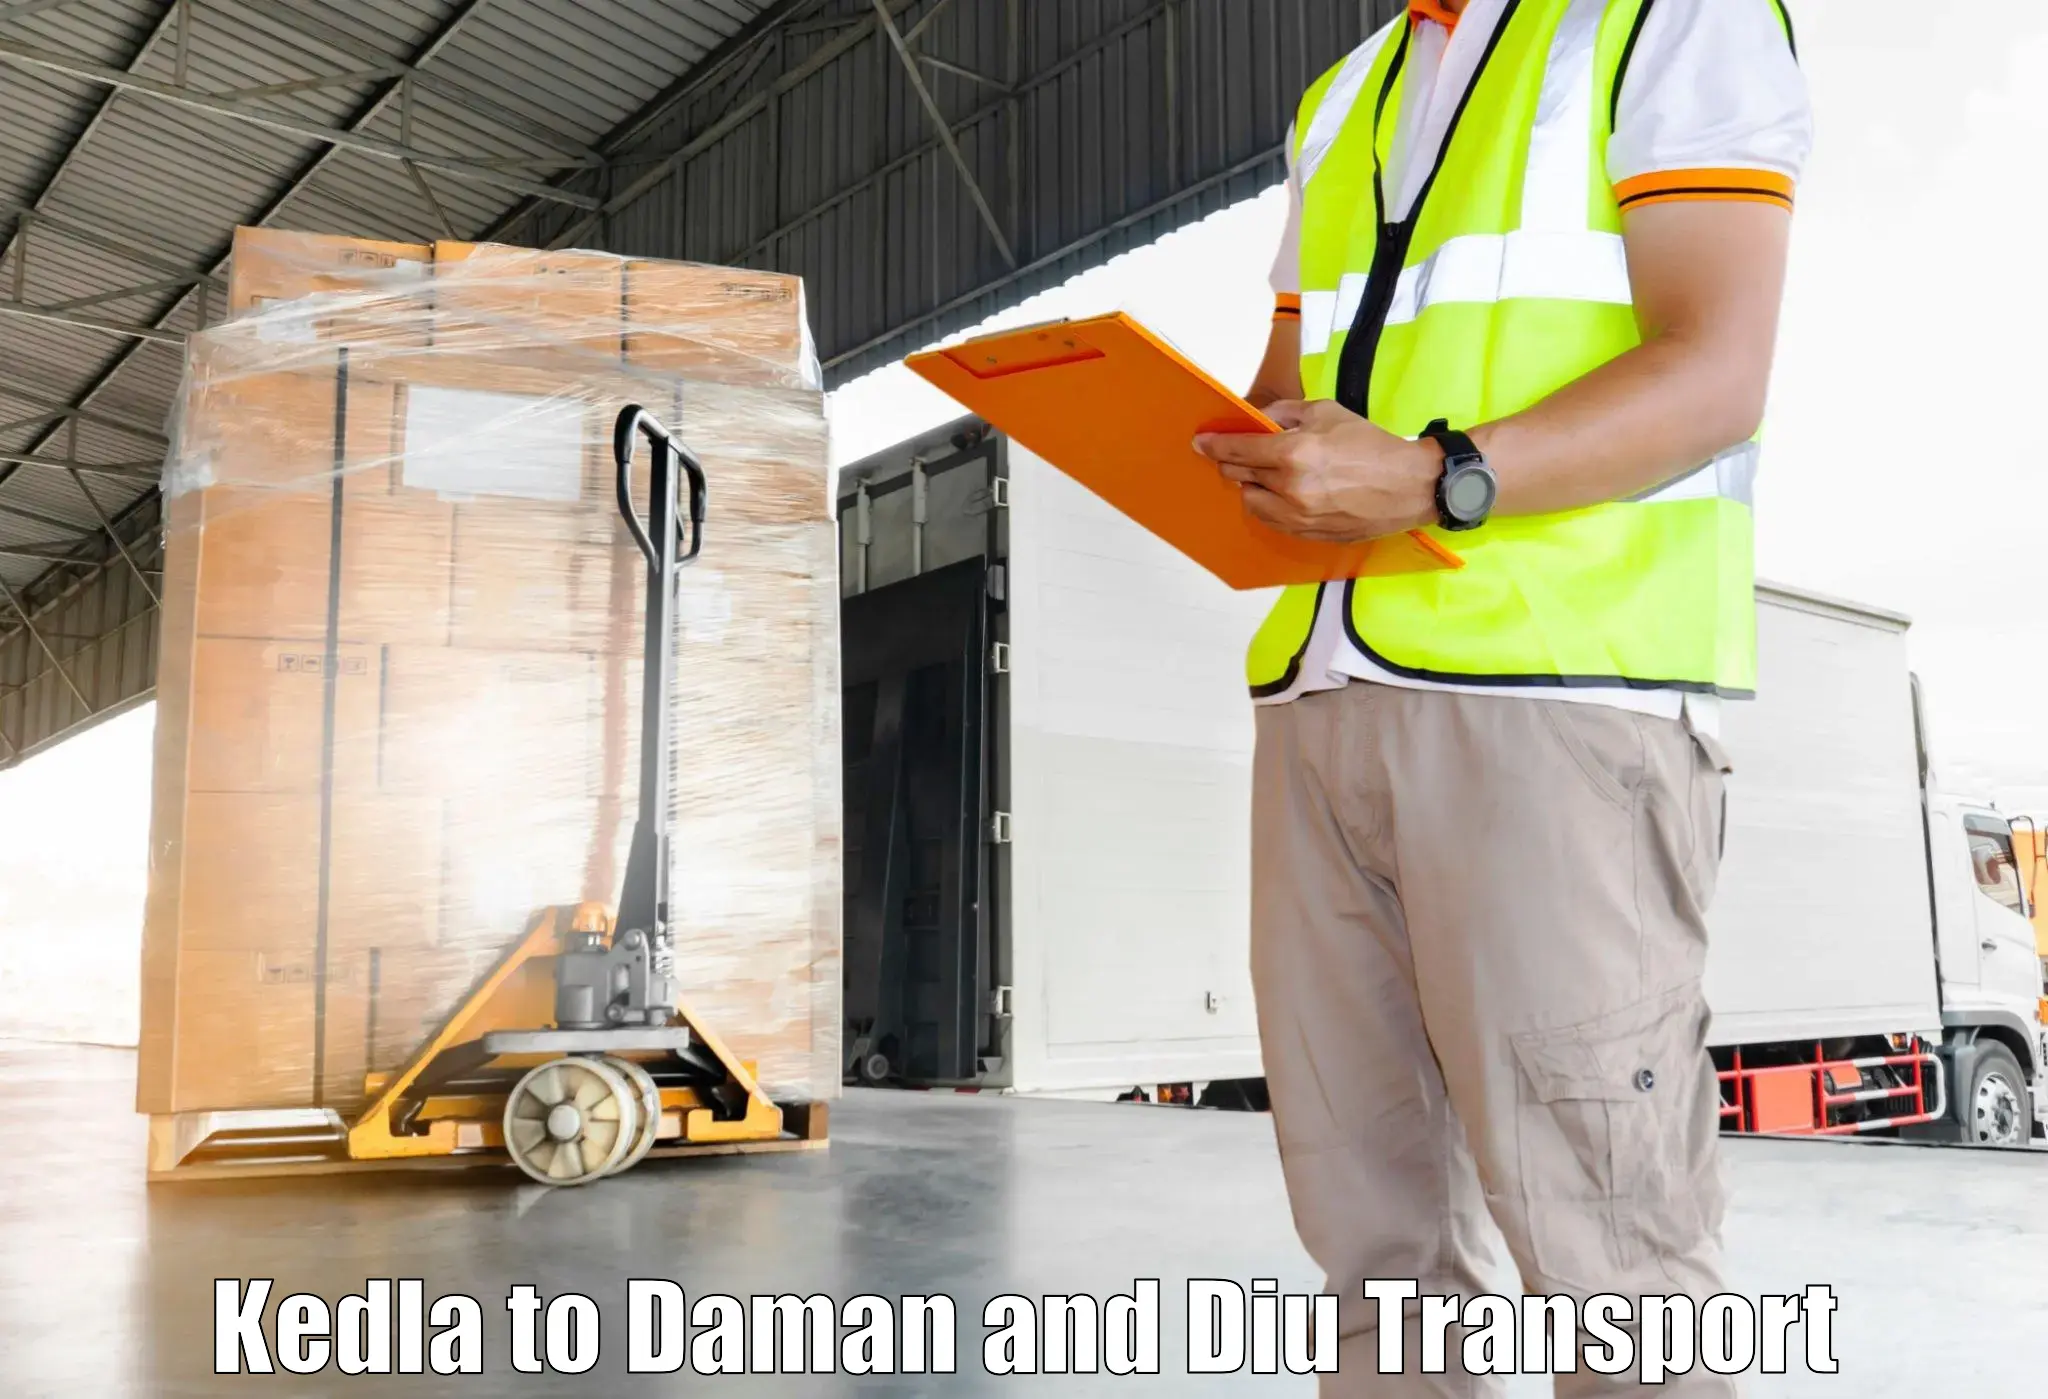 Goods delivery service Kedla to Daman